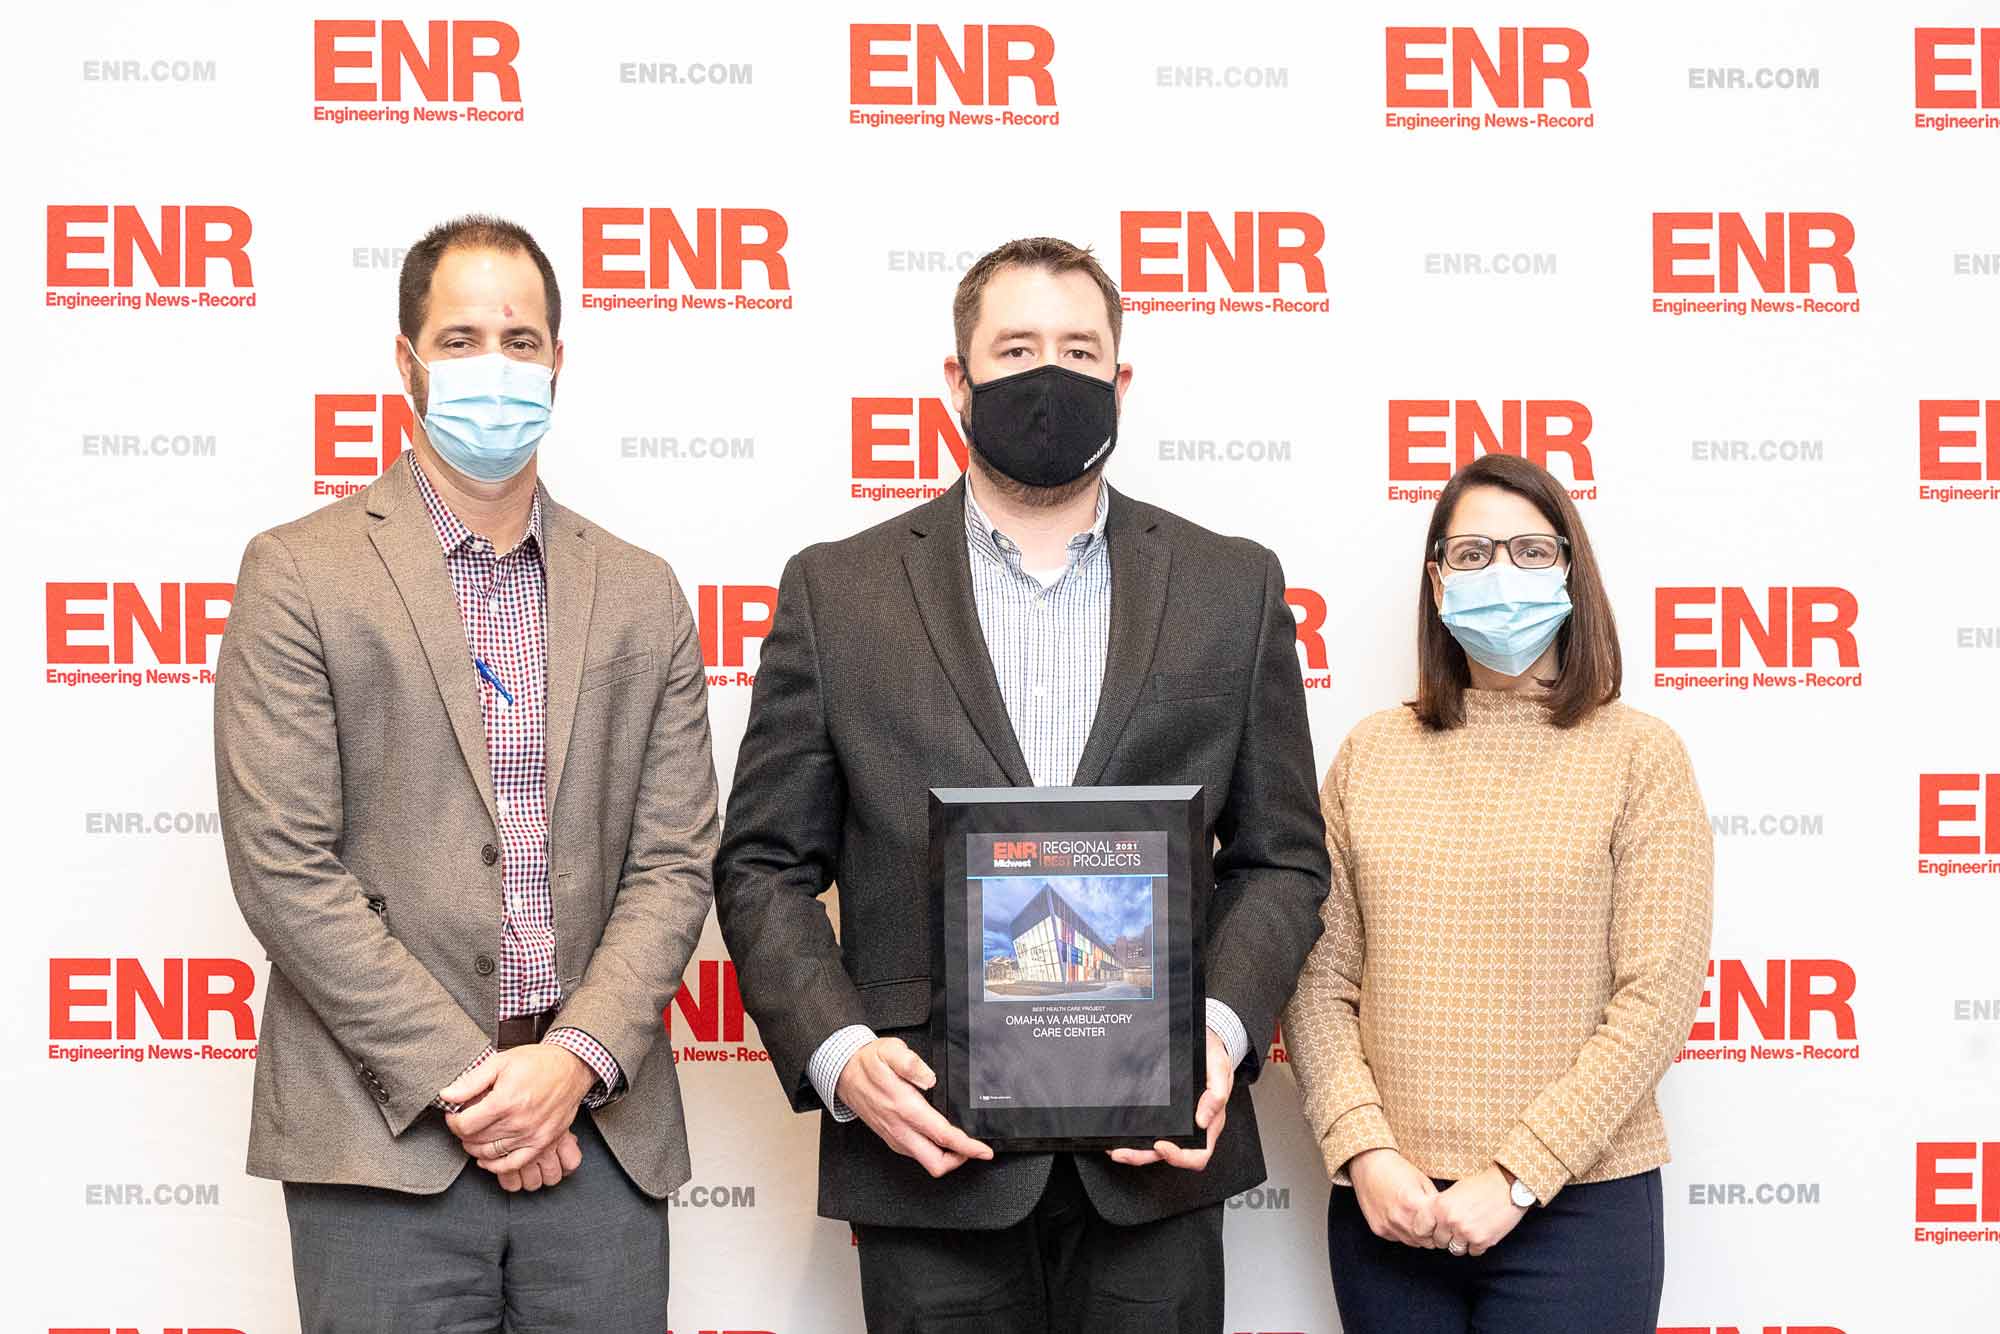 ENR Award Acceptance group photo with Kim Cowman from LEO A DALY